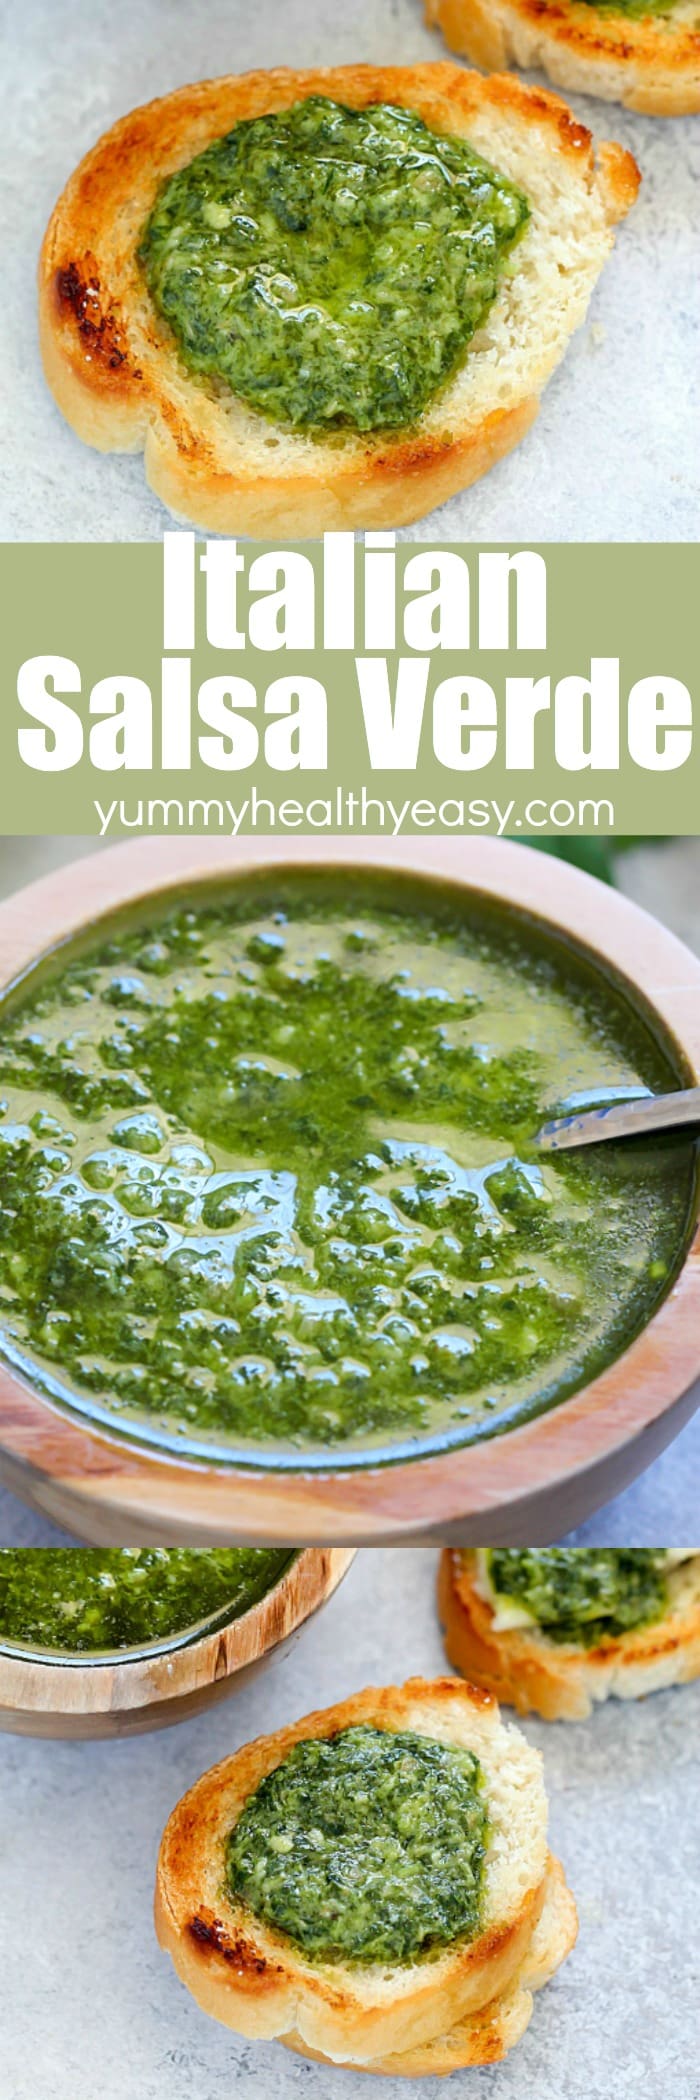 Traditional Italian Salsa Verde Recipe that adds so much flavor to grilled steak, fish or toasted 